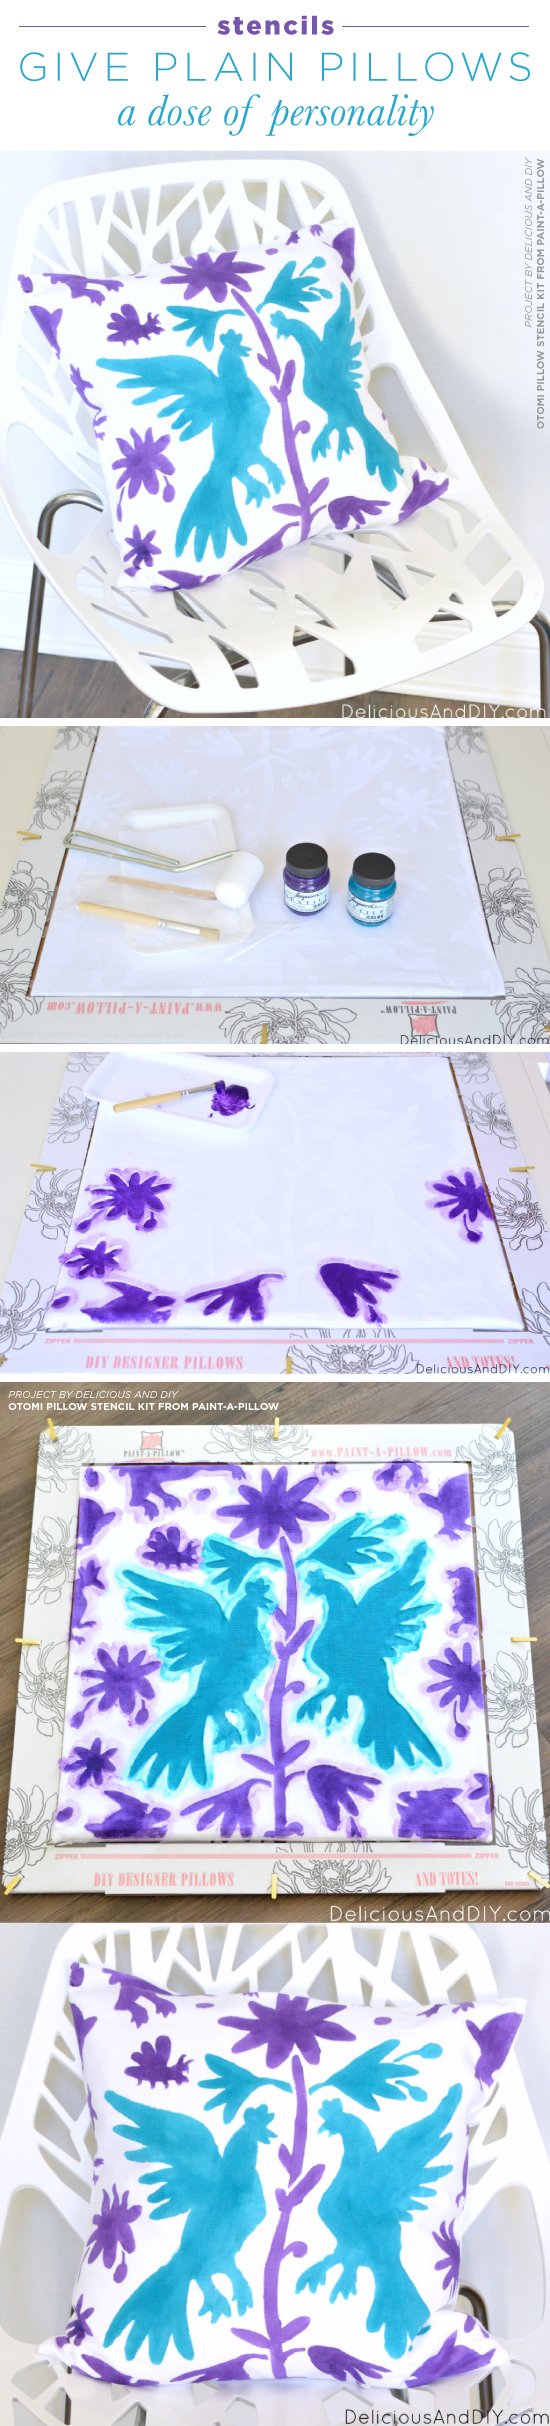 Cutting Edge Stencils shares how to stencil custom throw pillows using the Otomi Roosters Accent Pillow Stencil Kit. http://www.cuttingedgestencils.com/otomi-roosters-stenciling-paint-a-pillow-kit.html